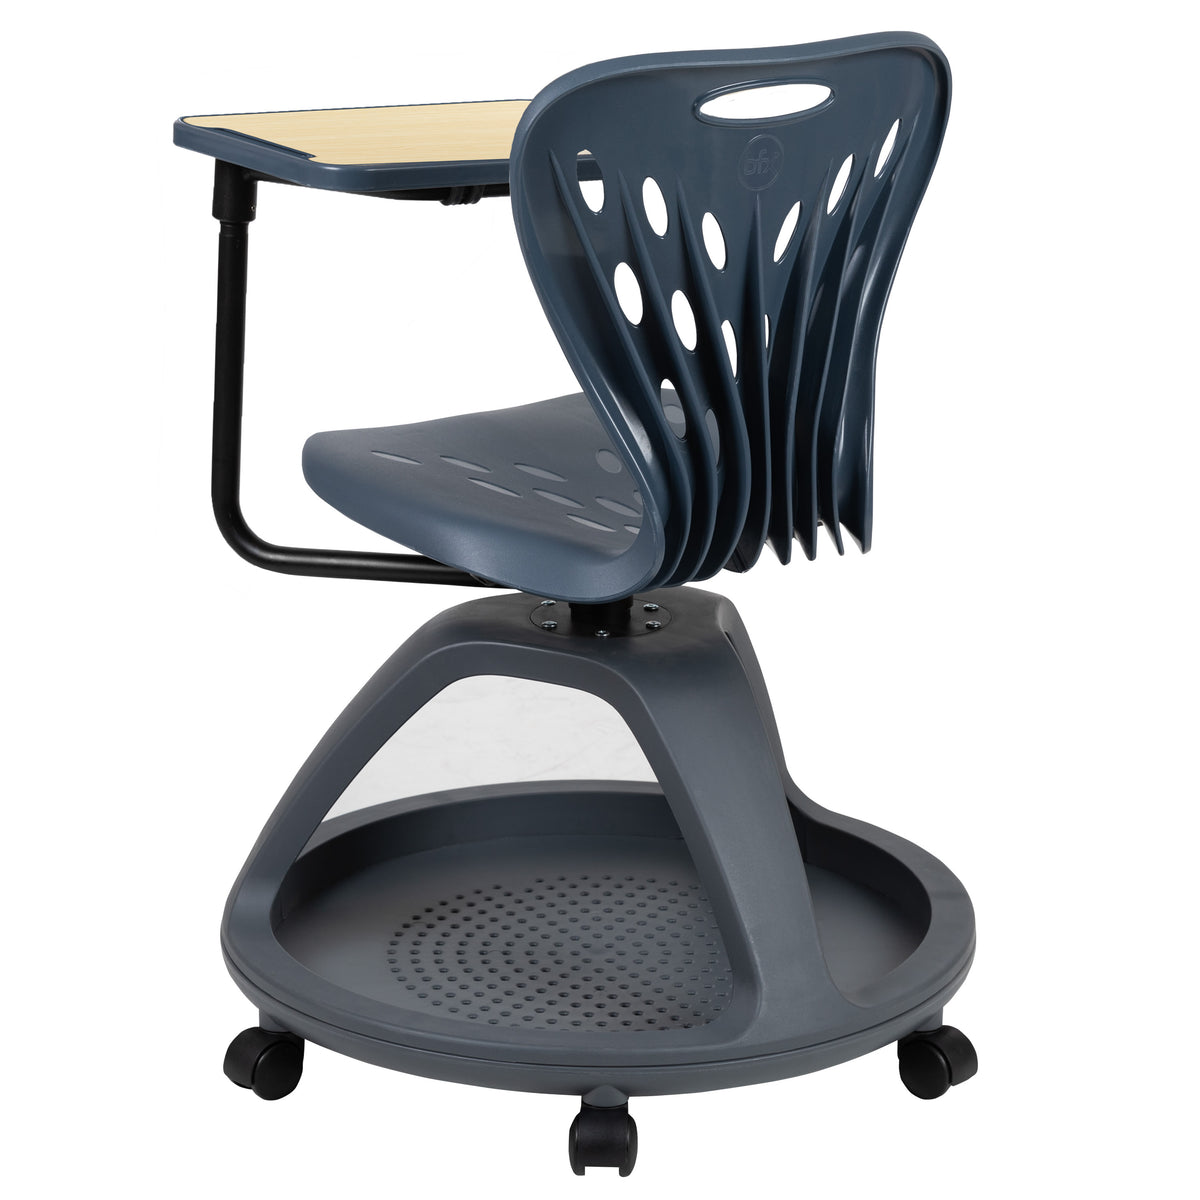 Dark Gray |#| Dark Gray Mobile Desk Chair - 360° Tablet Rotation and Storage Cubby